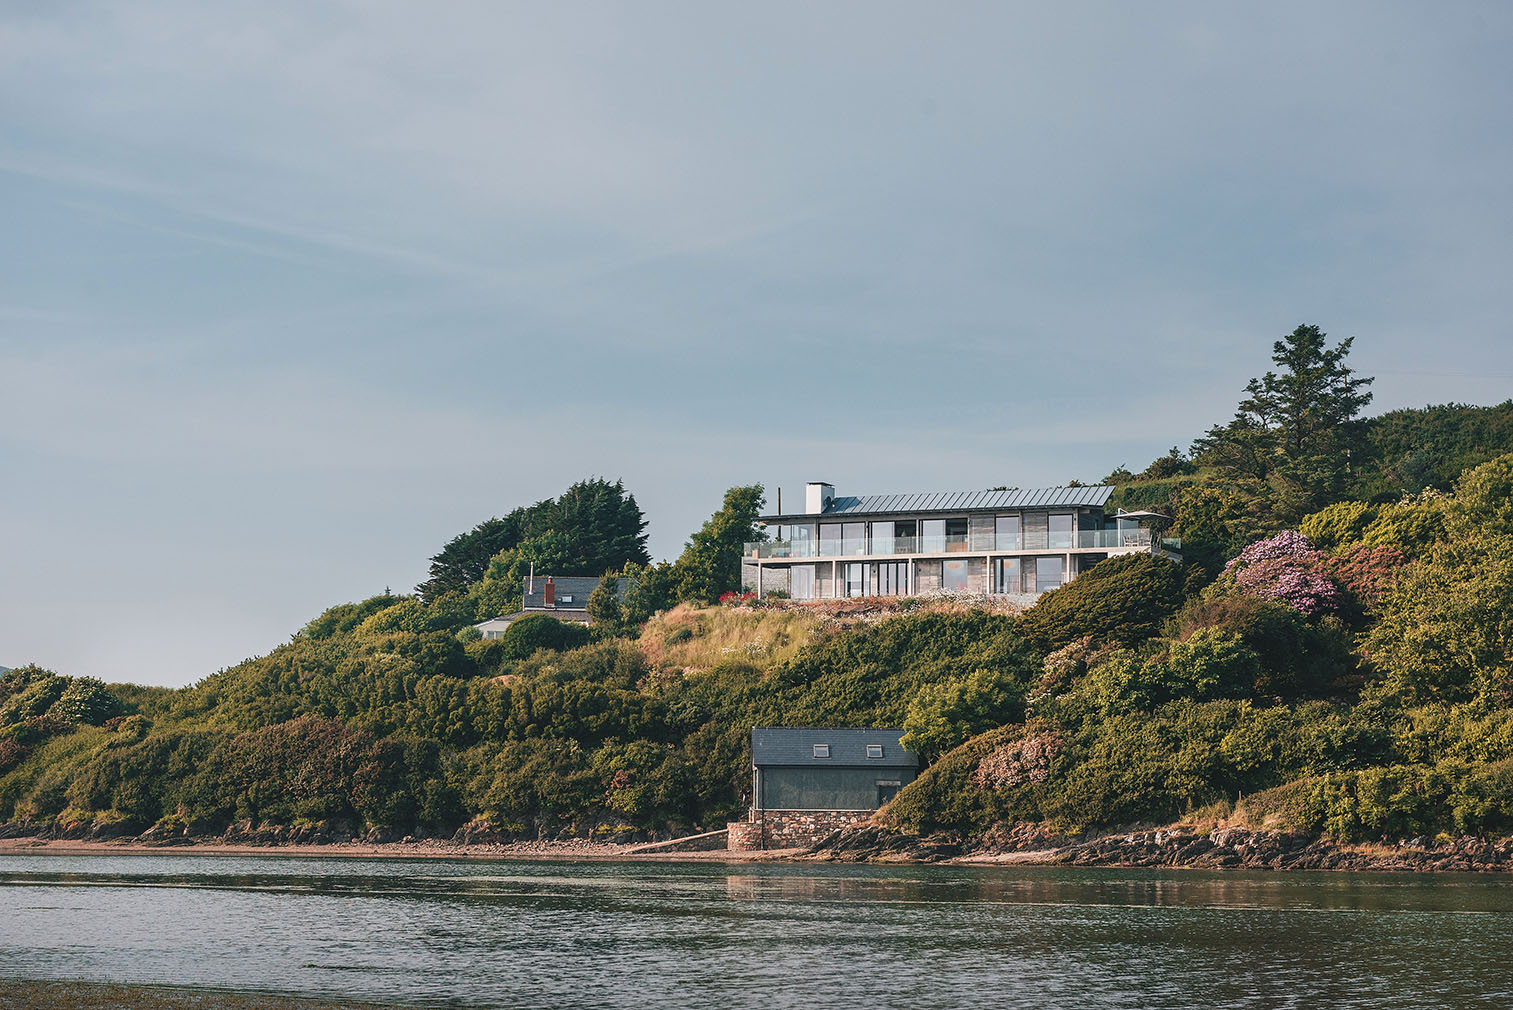 Welsh holiday home designed by John Pardey Architects